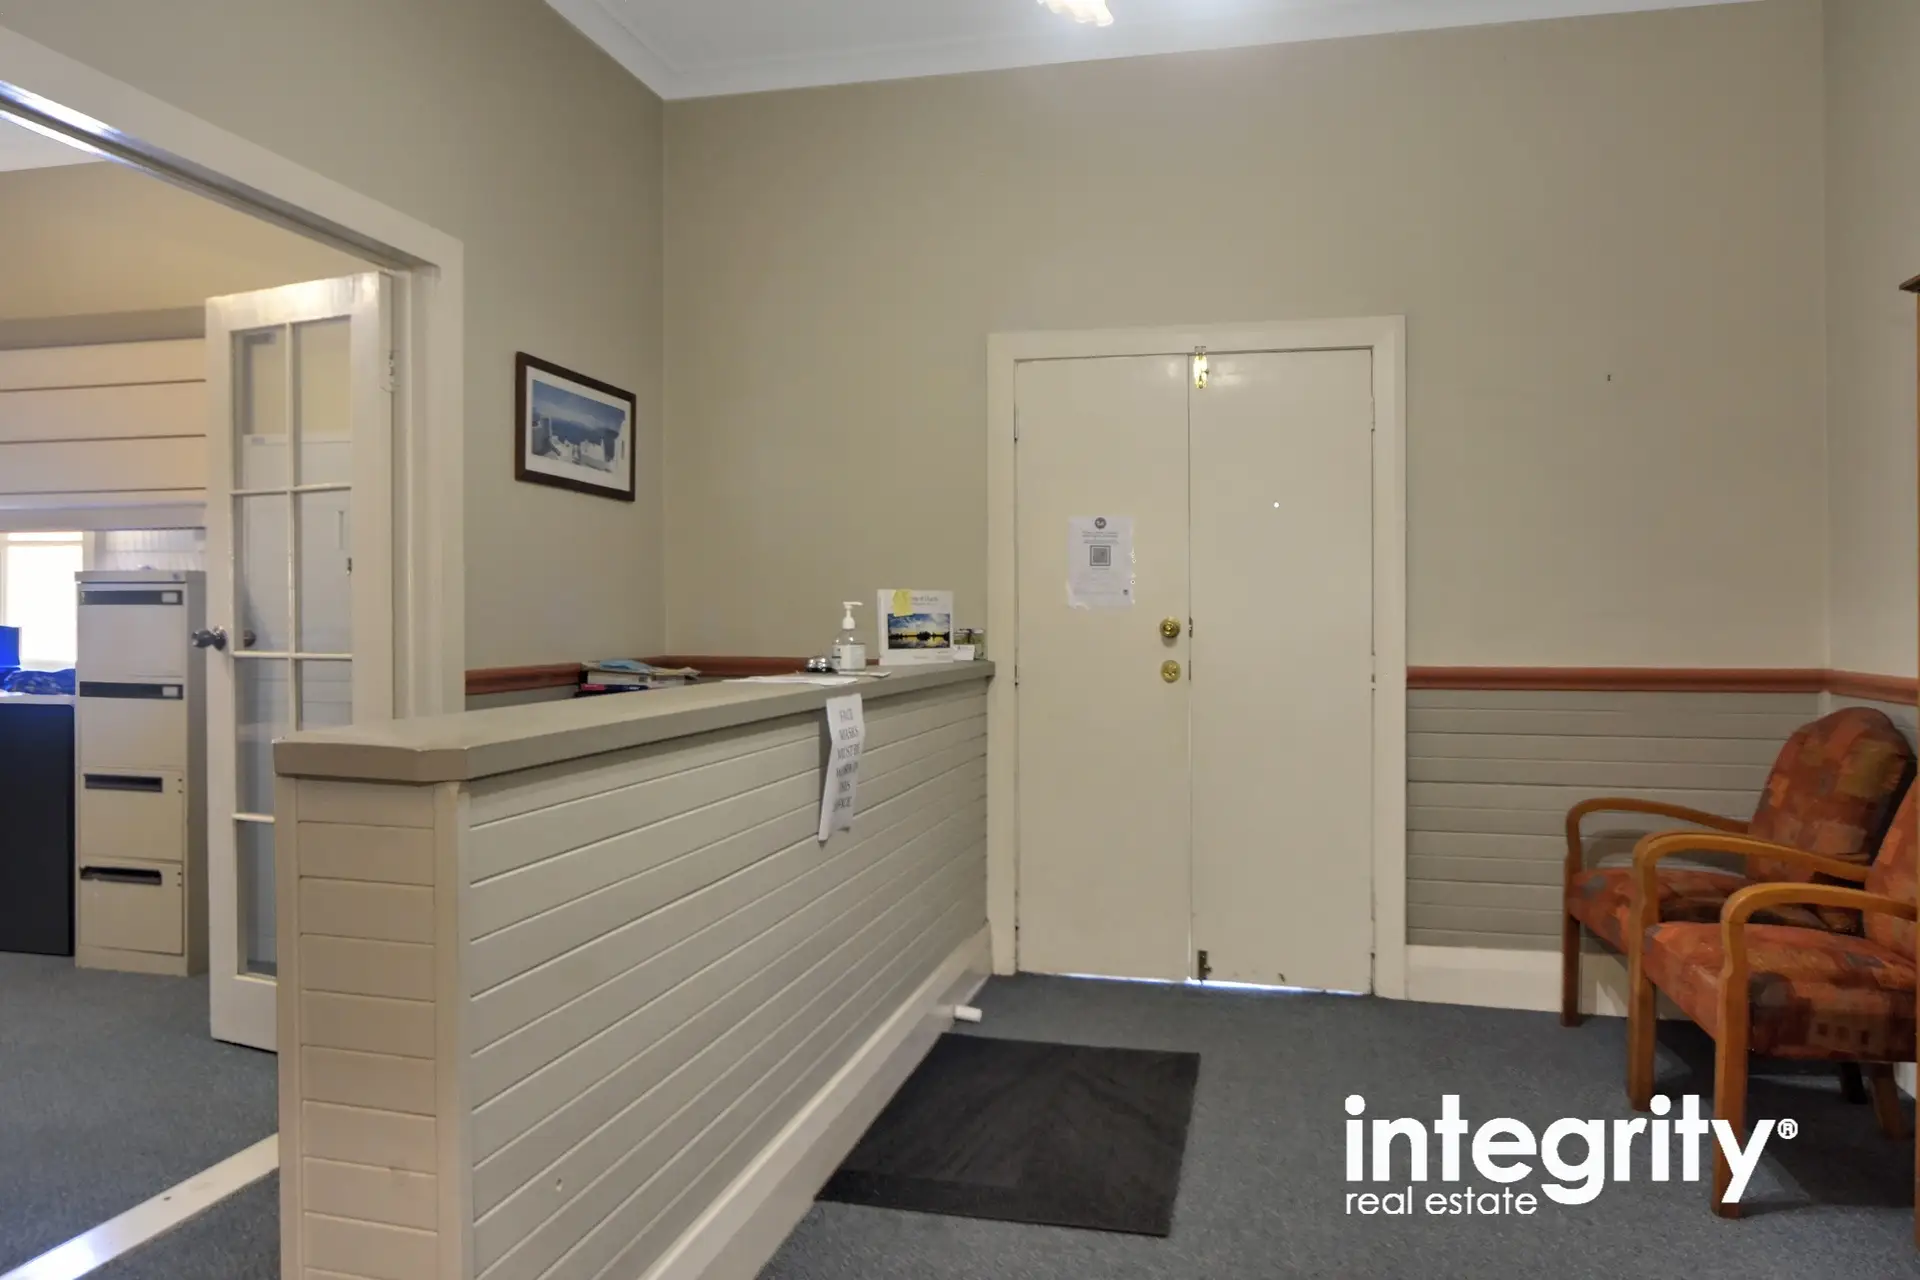 71 Plunkett Street, Nowra For Sale by Integrity Real Estate - image 5